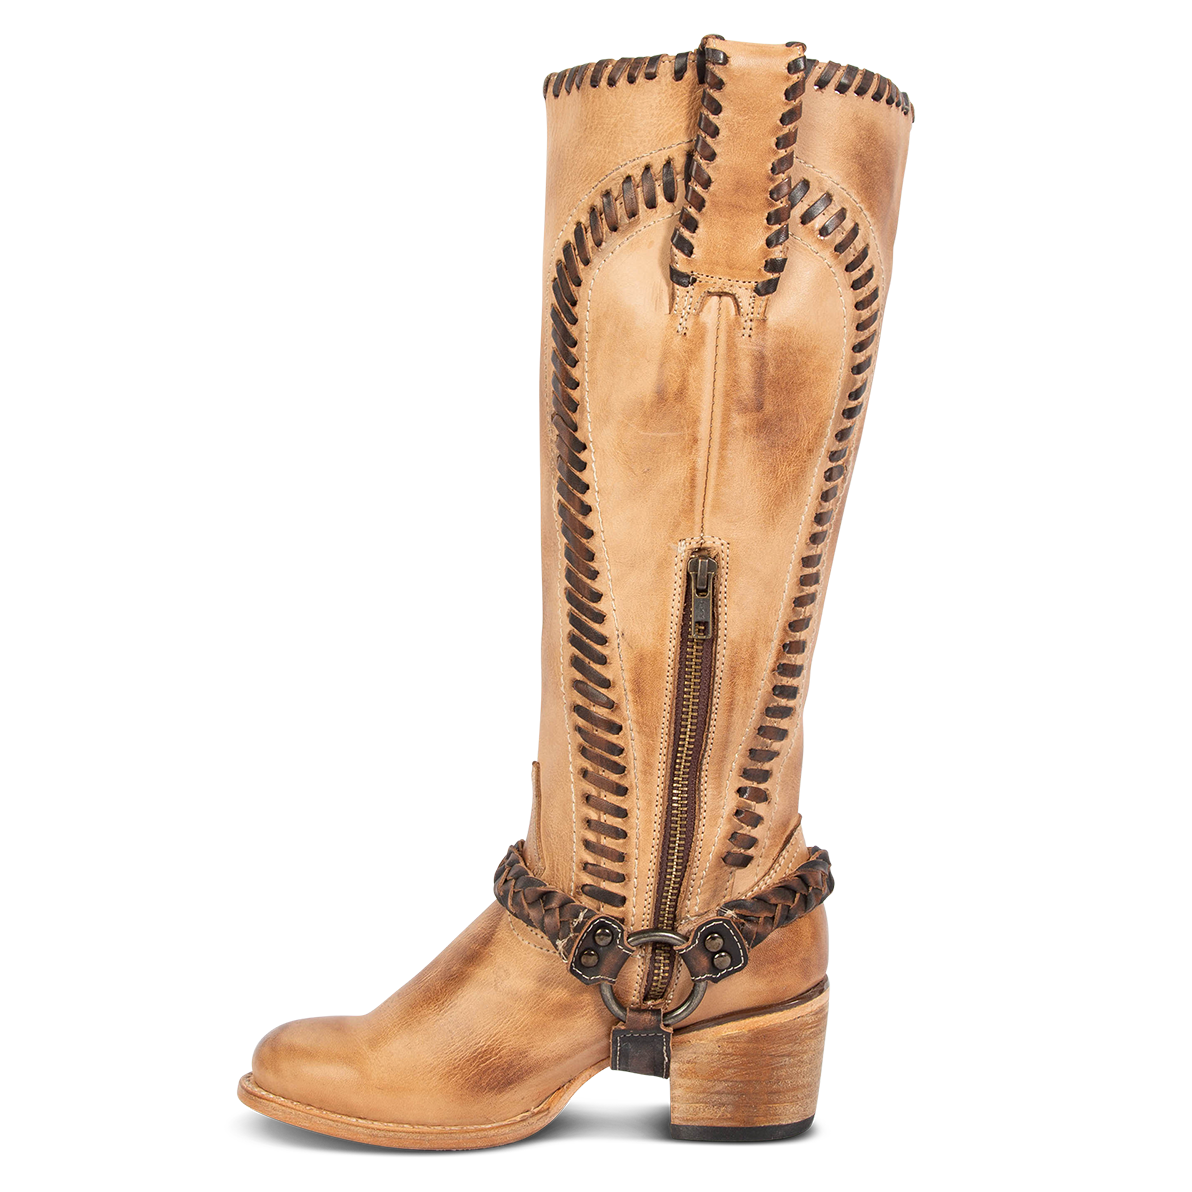 Side view showing leather pull straps, inside working brass zipper, and braided ankle harness on FREEBIRD women's Clover beige leather boot